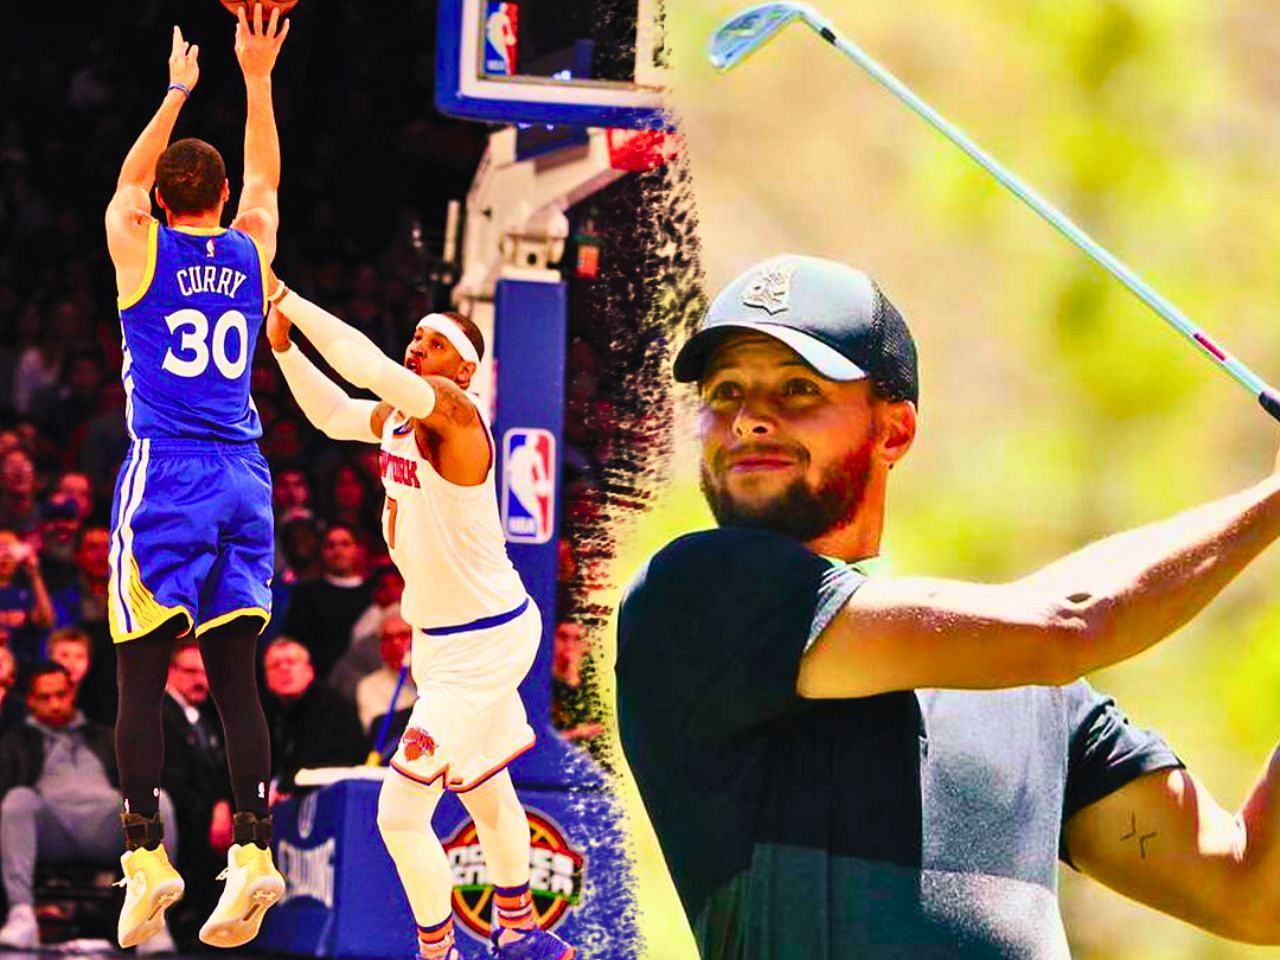 Steph Curry just dropped a hole-in-one at the ACC Tournament